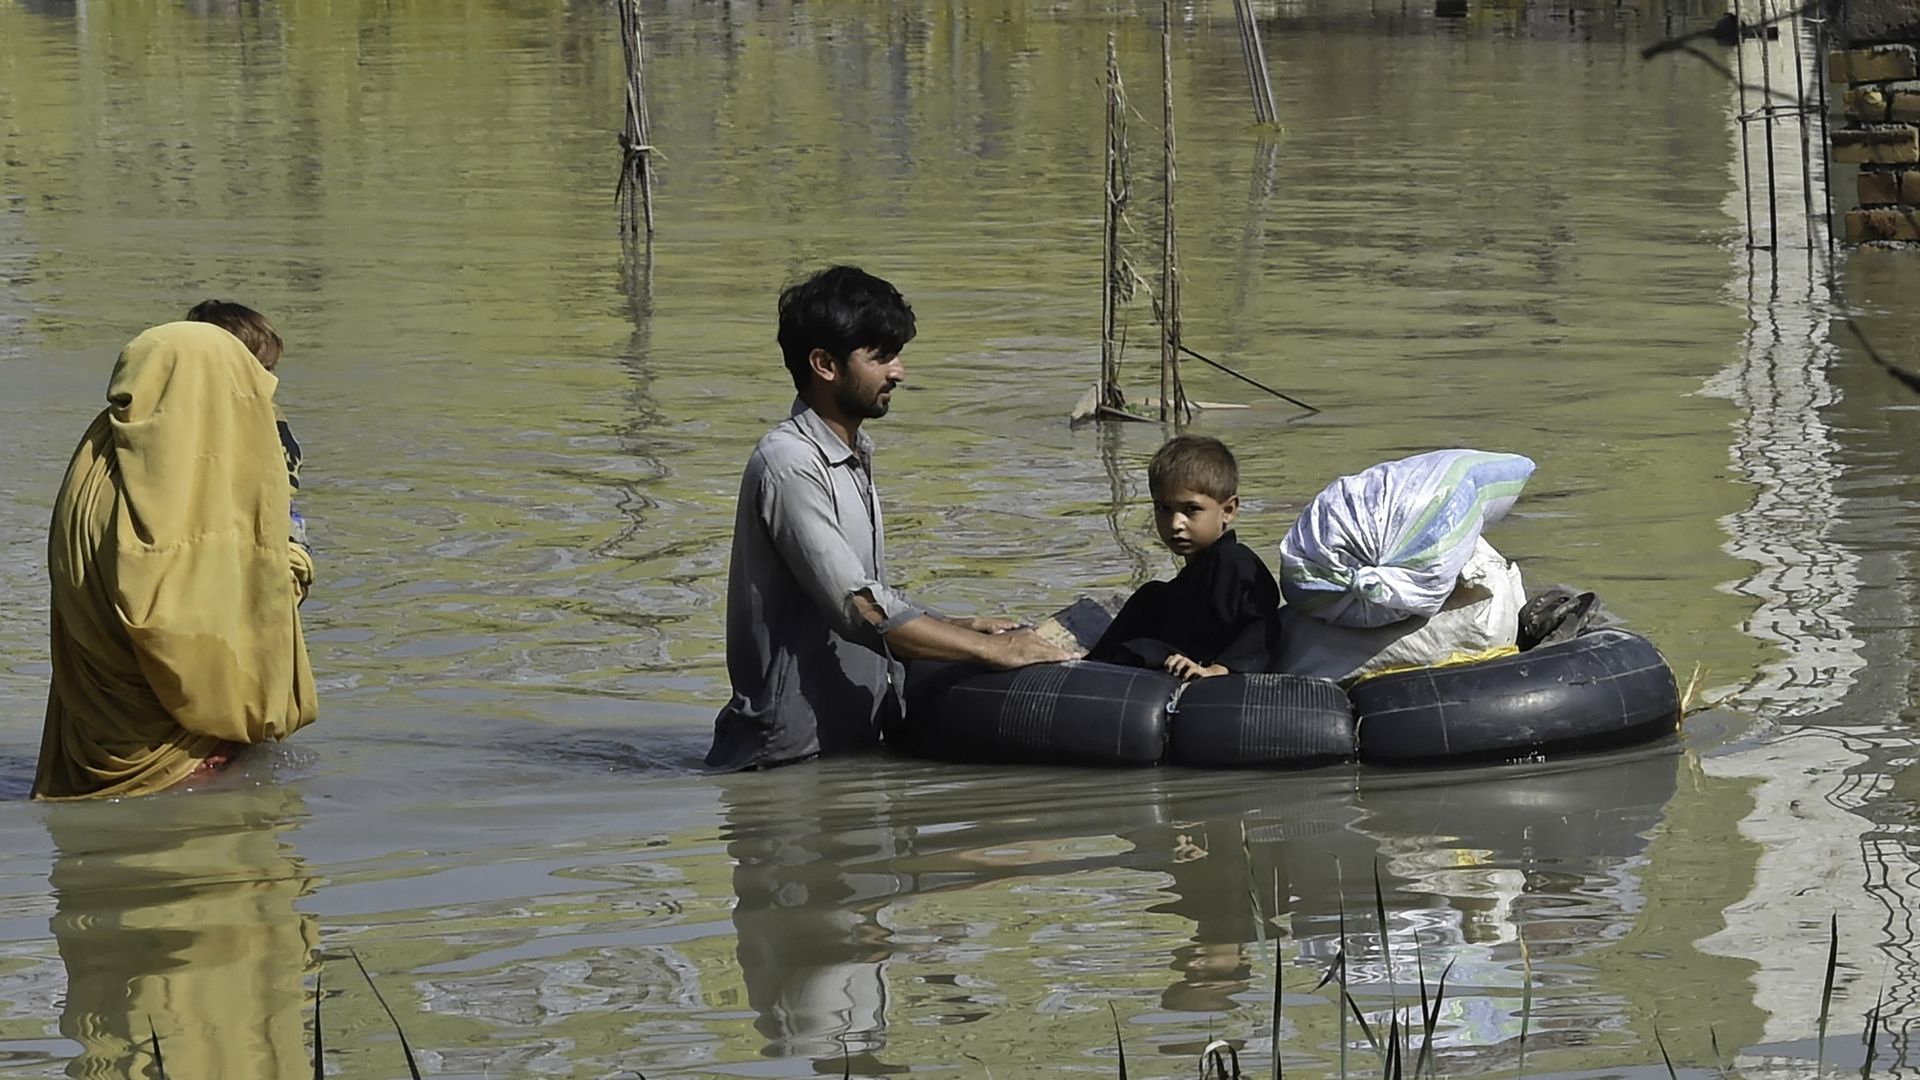 People wade through floodwaters in Pakistan.